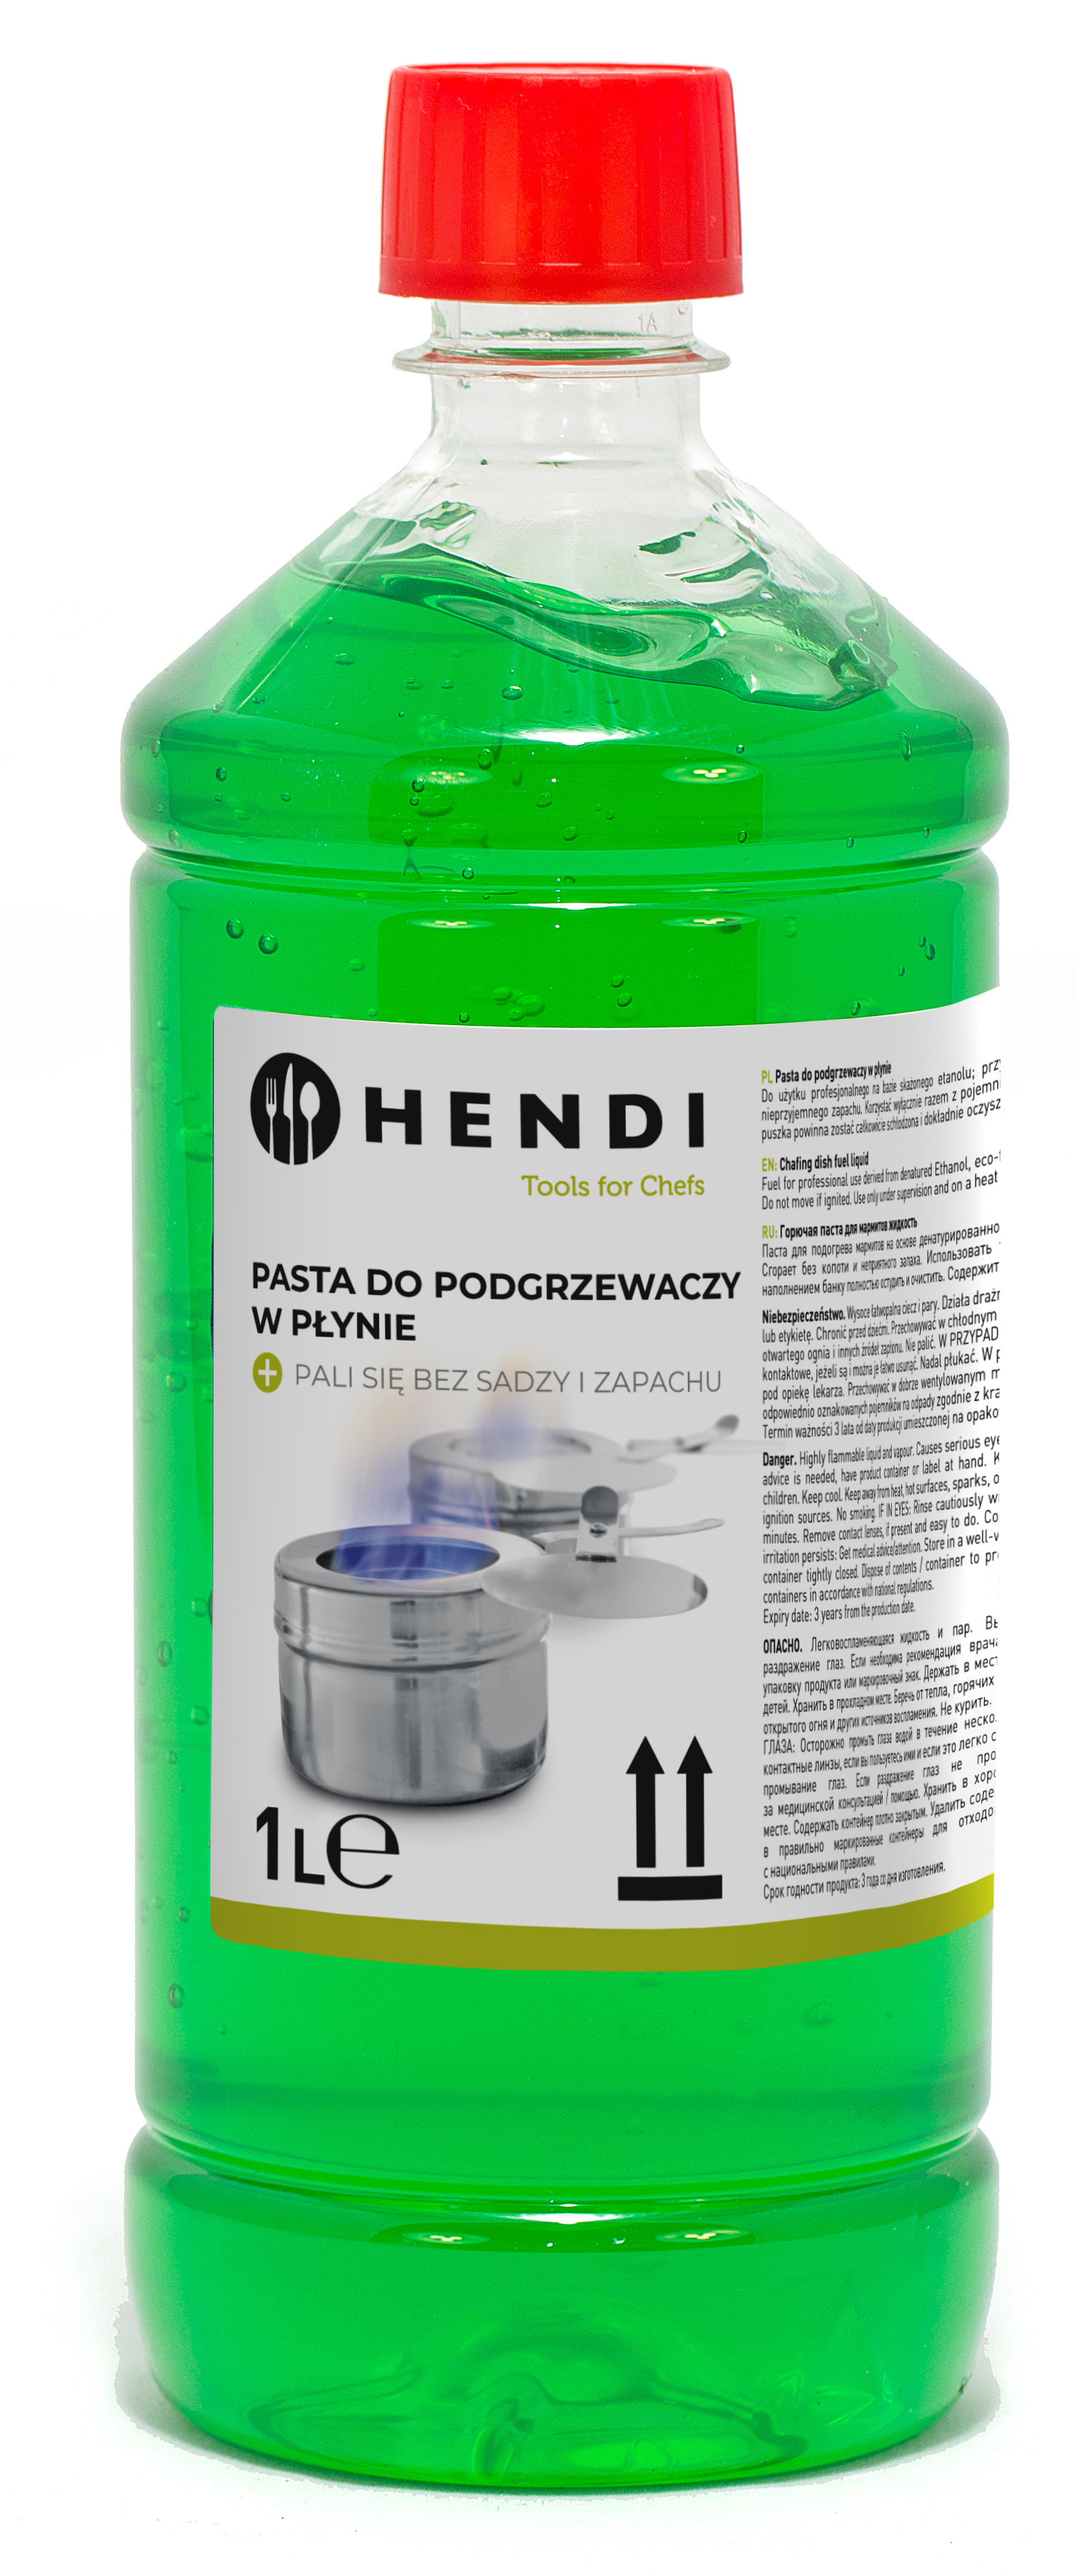 Combustible pour chafing dish - HENDI Tools for Chefs